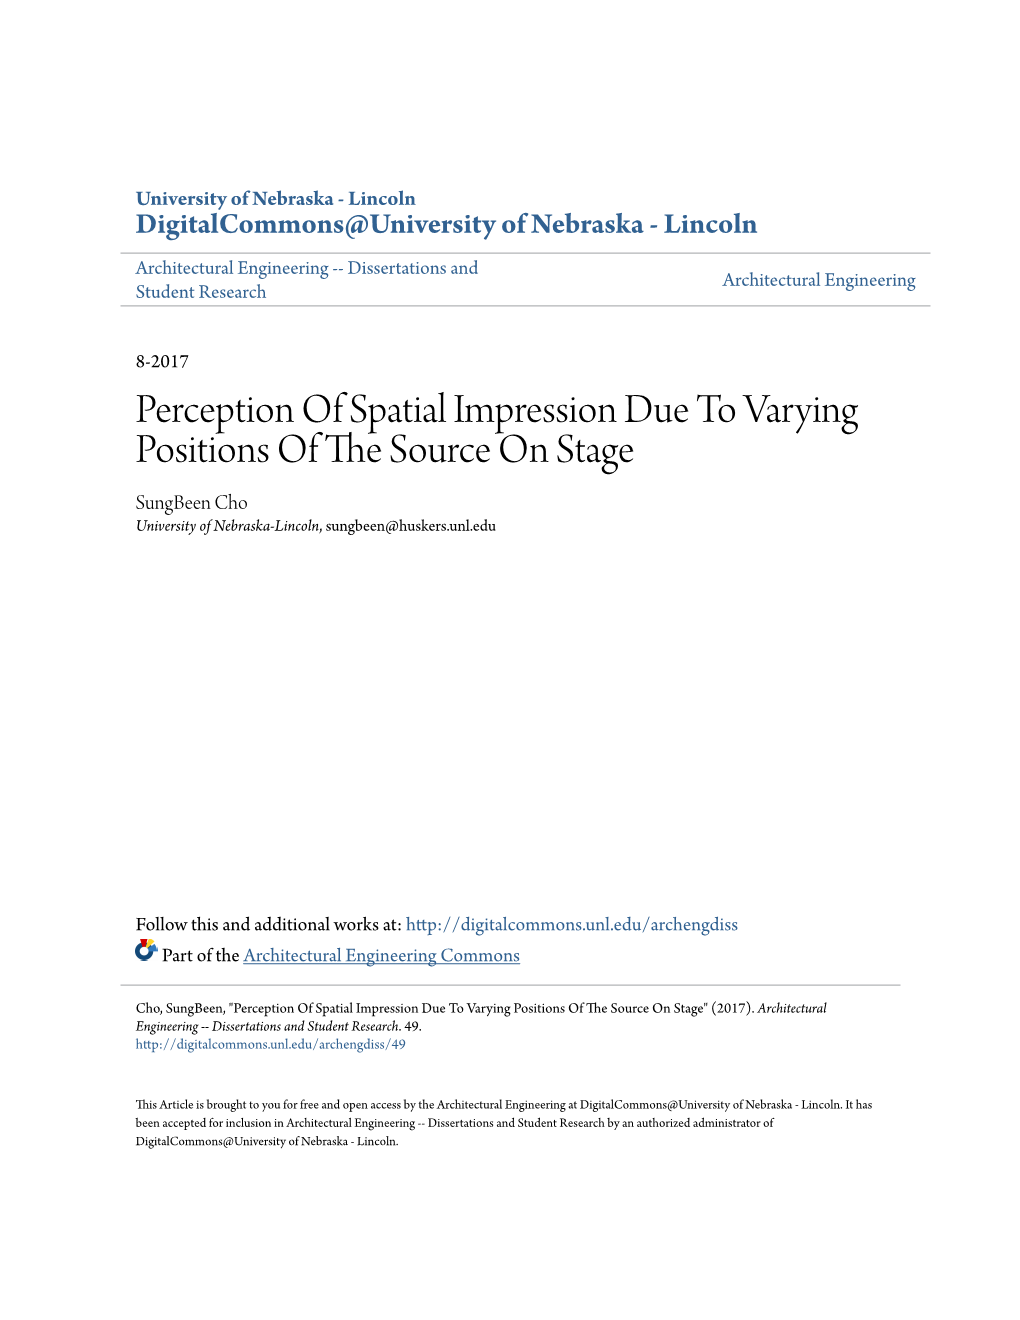 Perception of Spatial Impression Due to Varying Positions of the Source